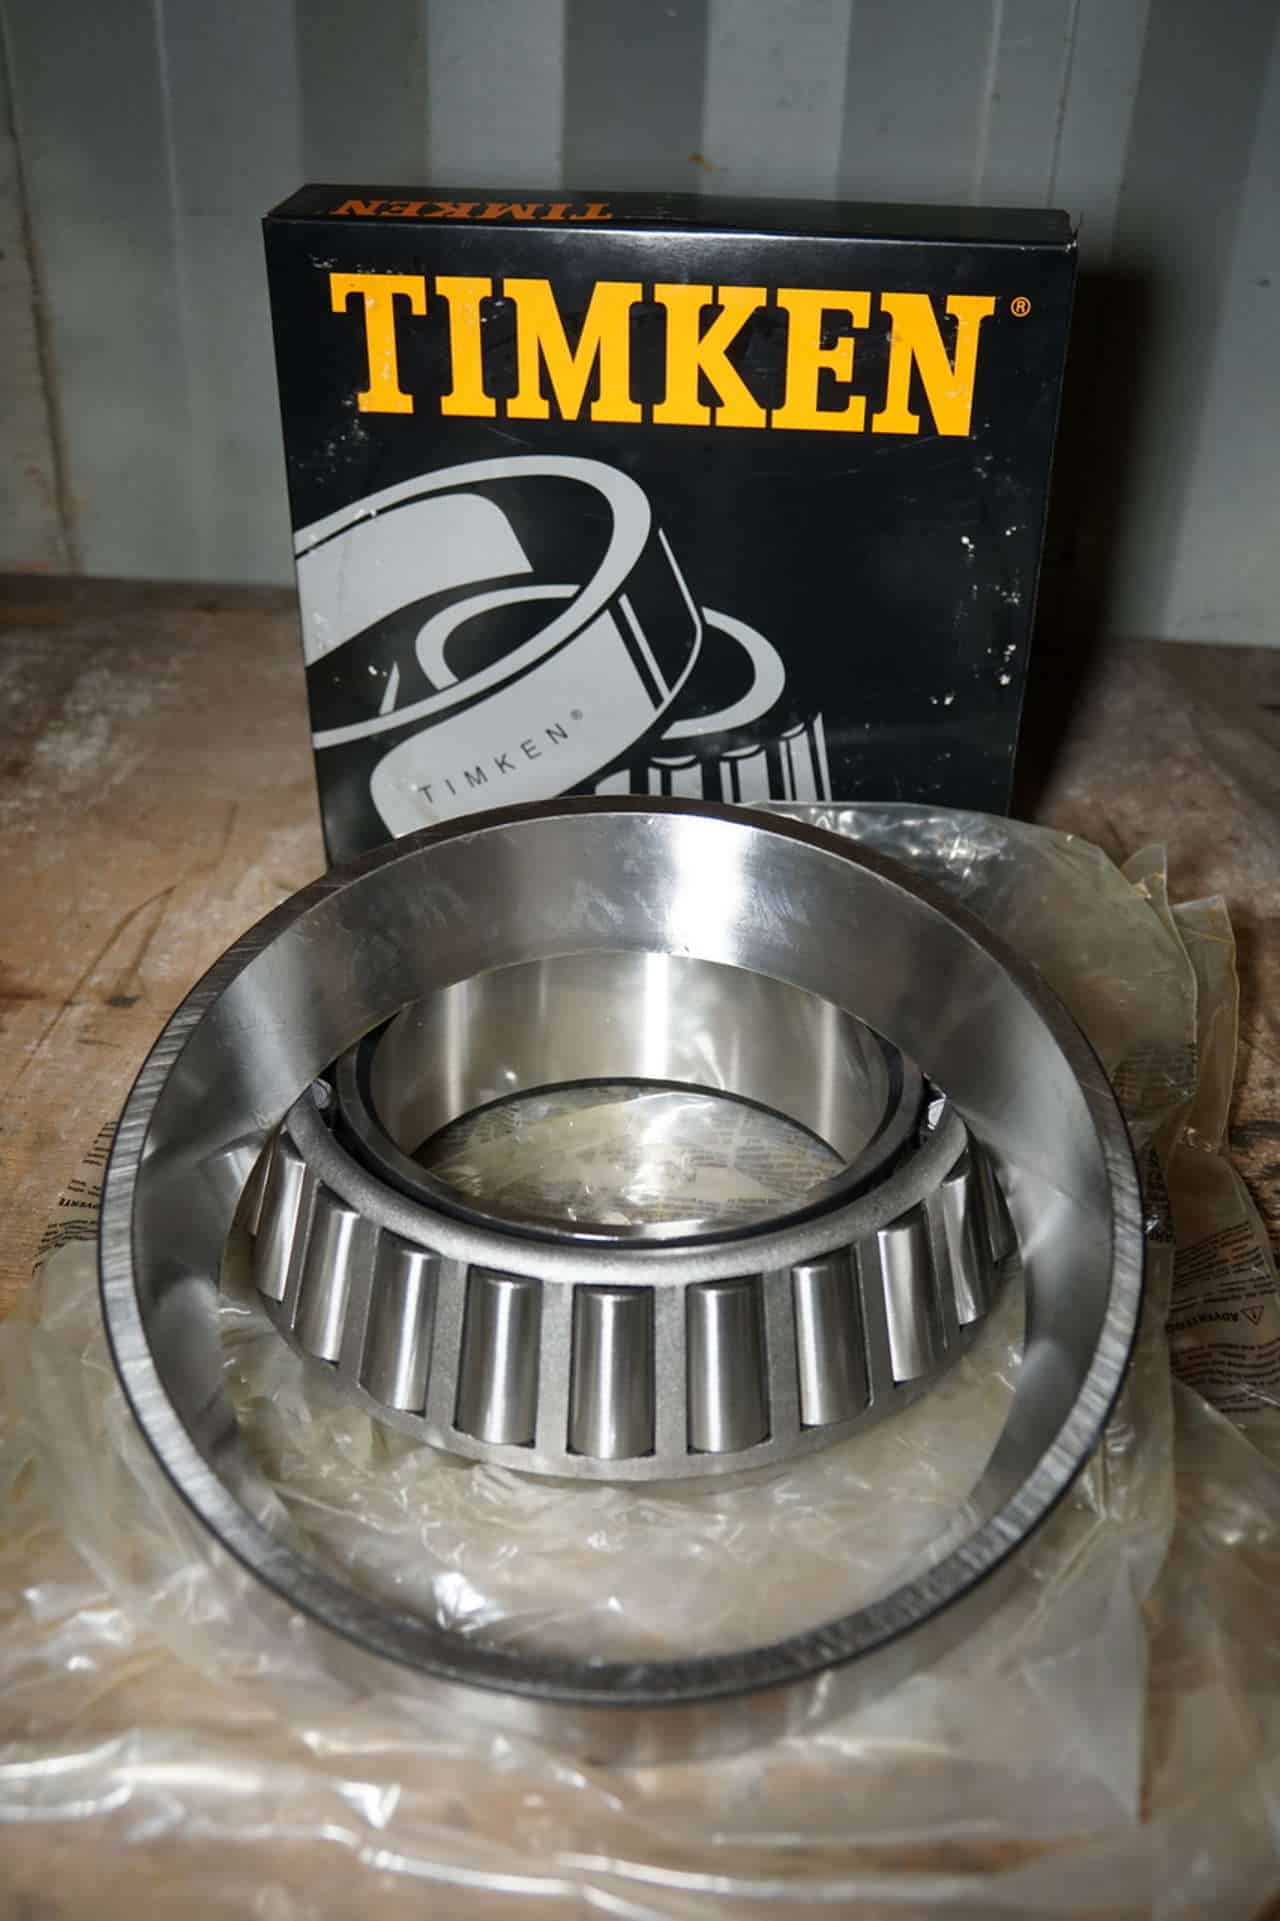 Timken-bearing-and-race-for-the-tender-3